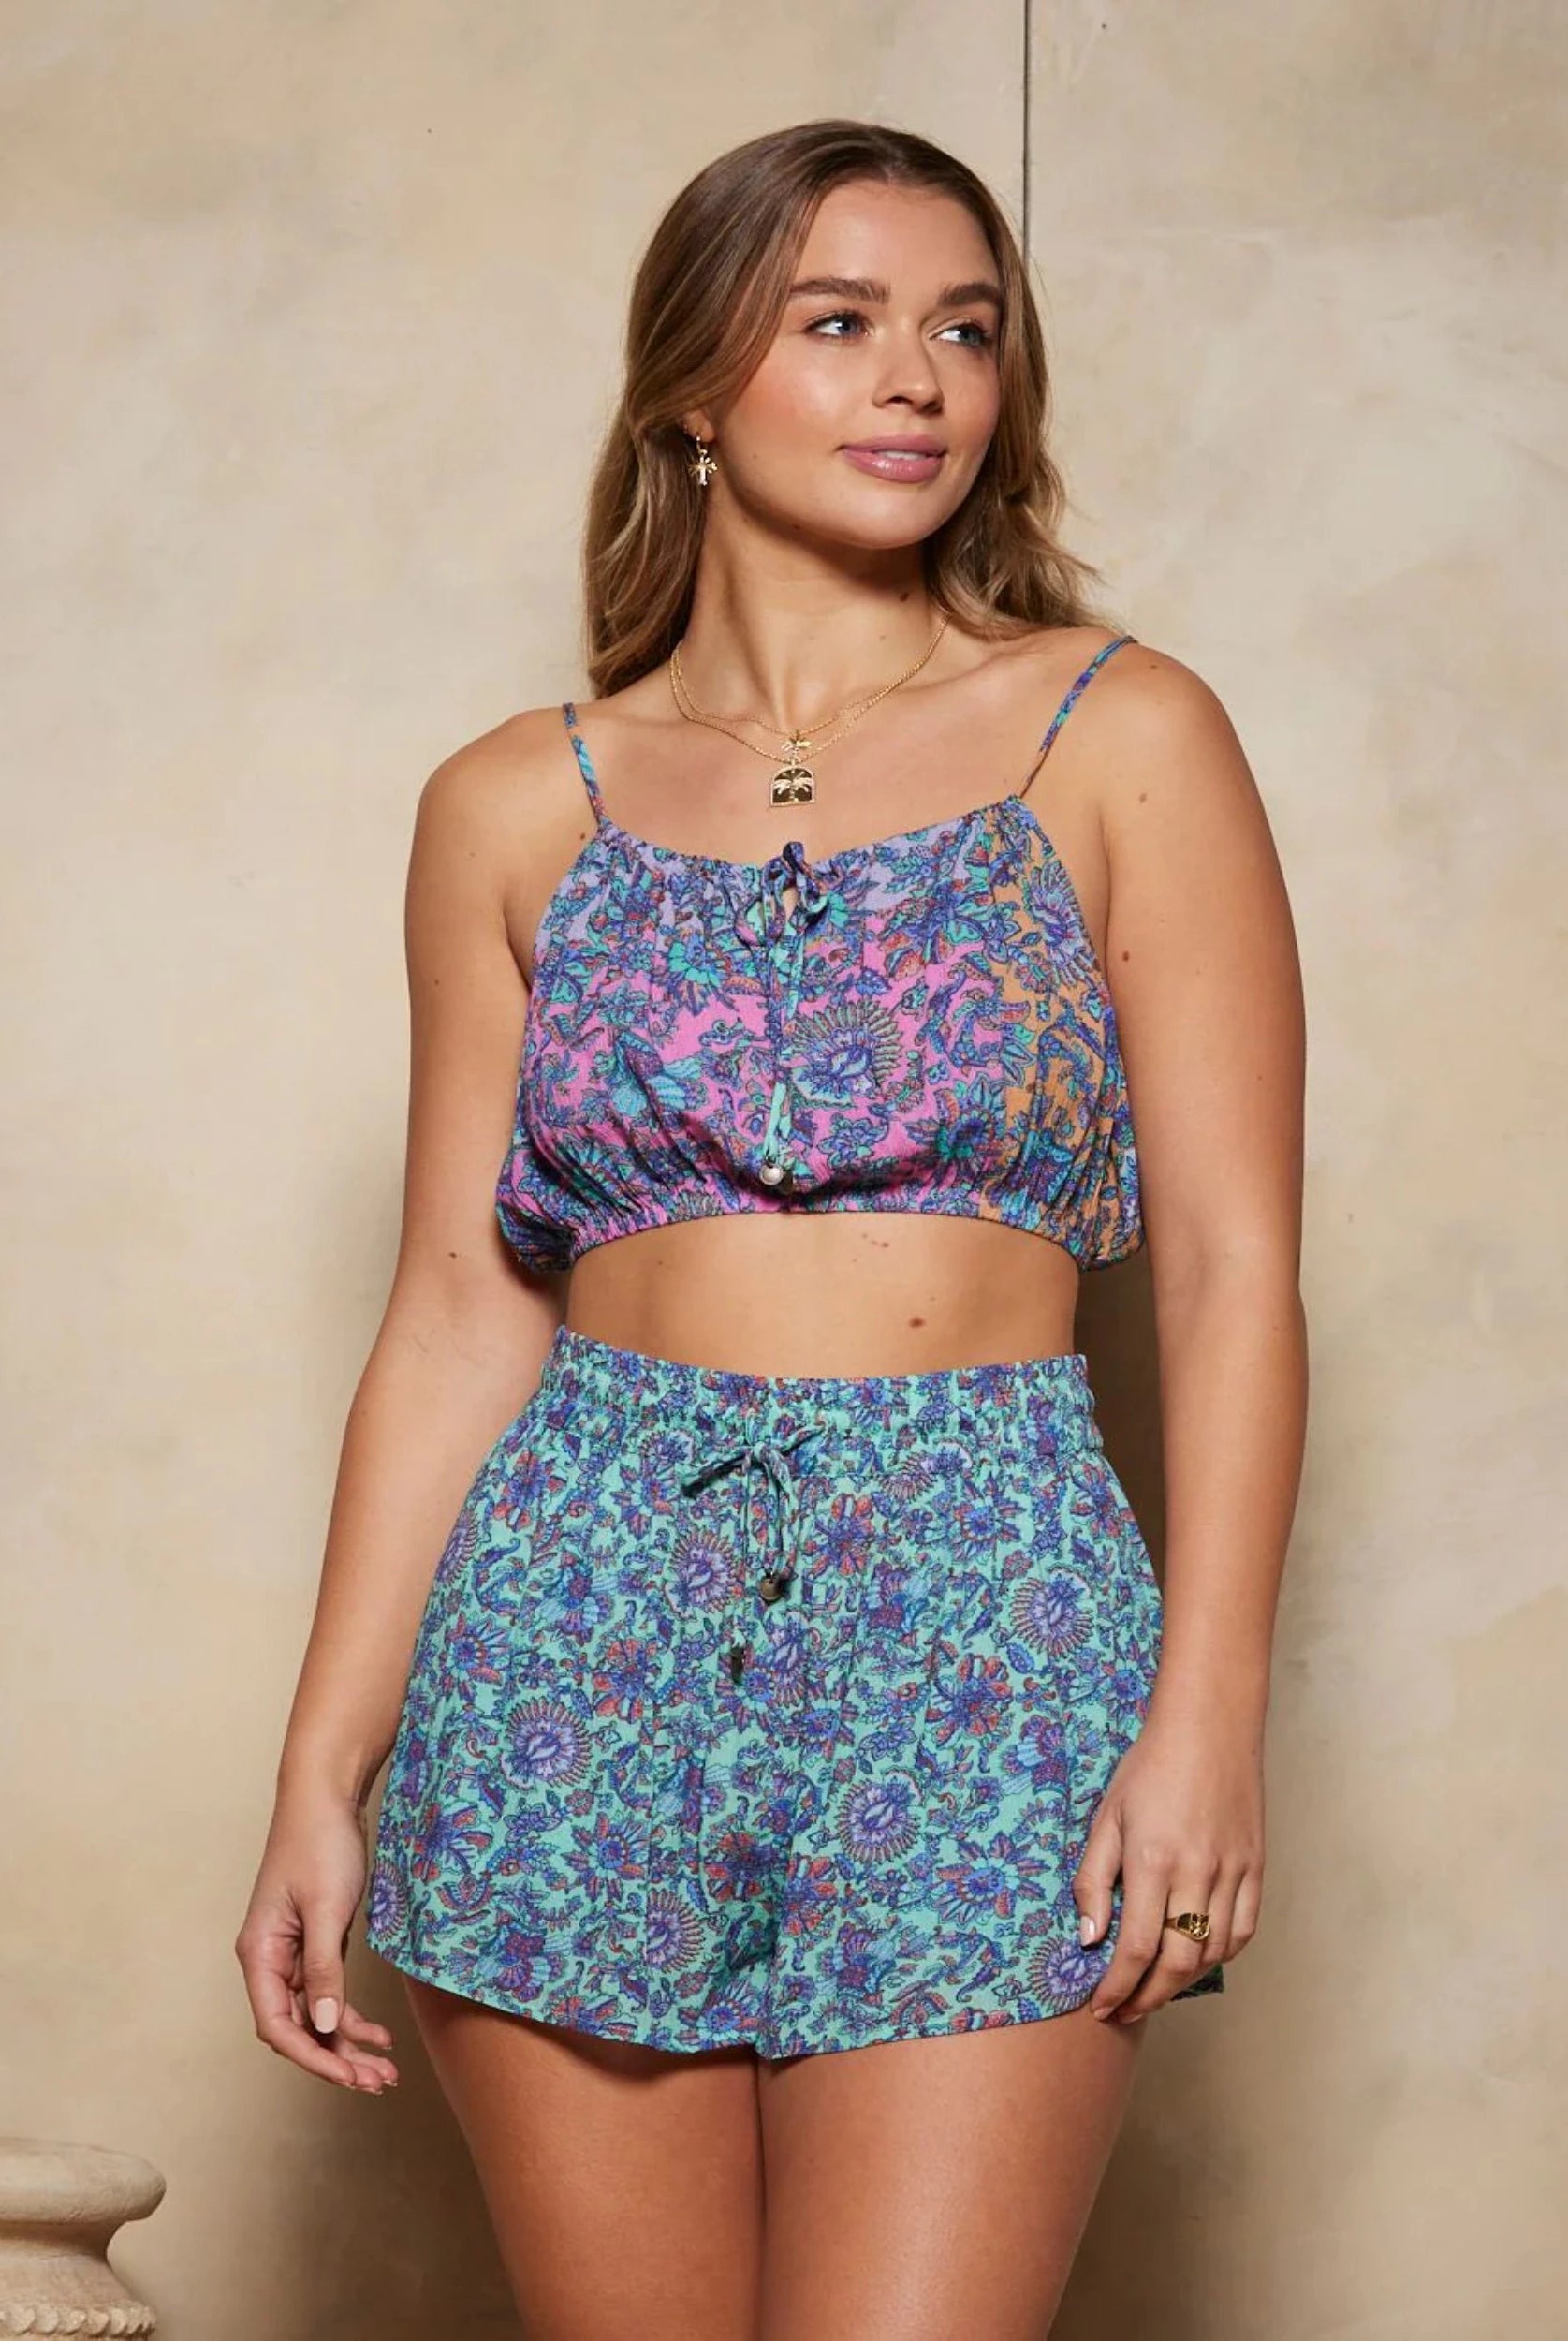 Pretty paisley floral printed cami top 